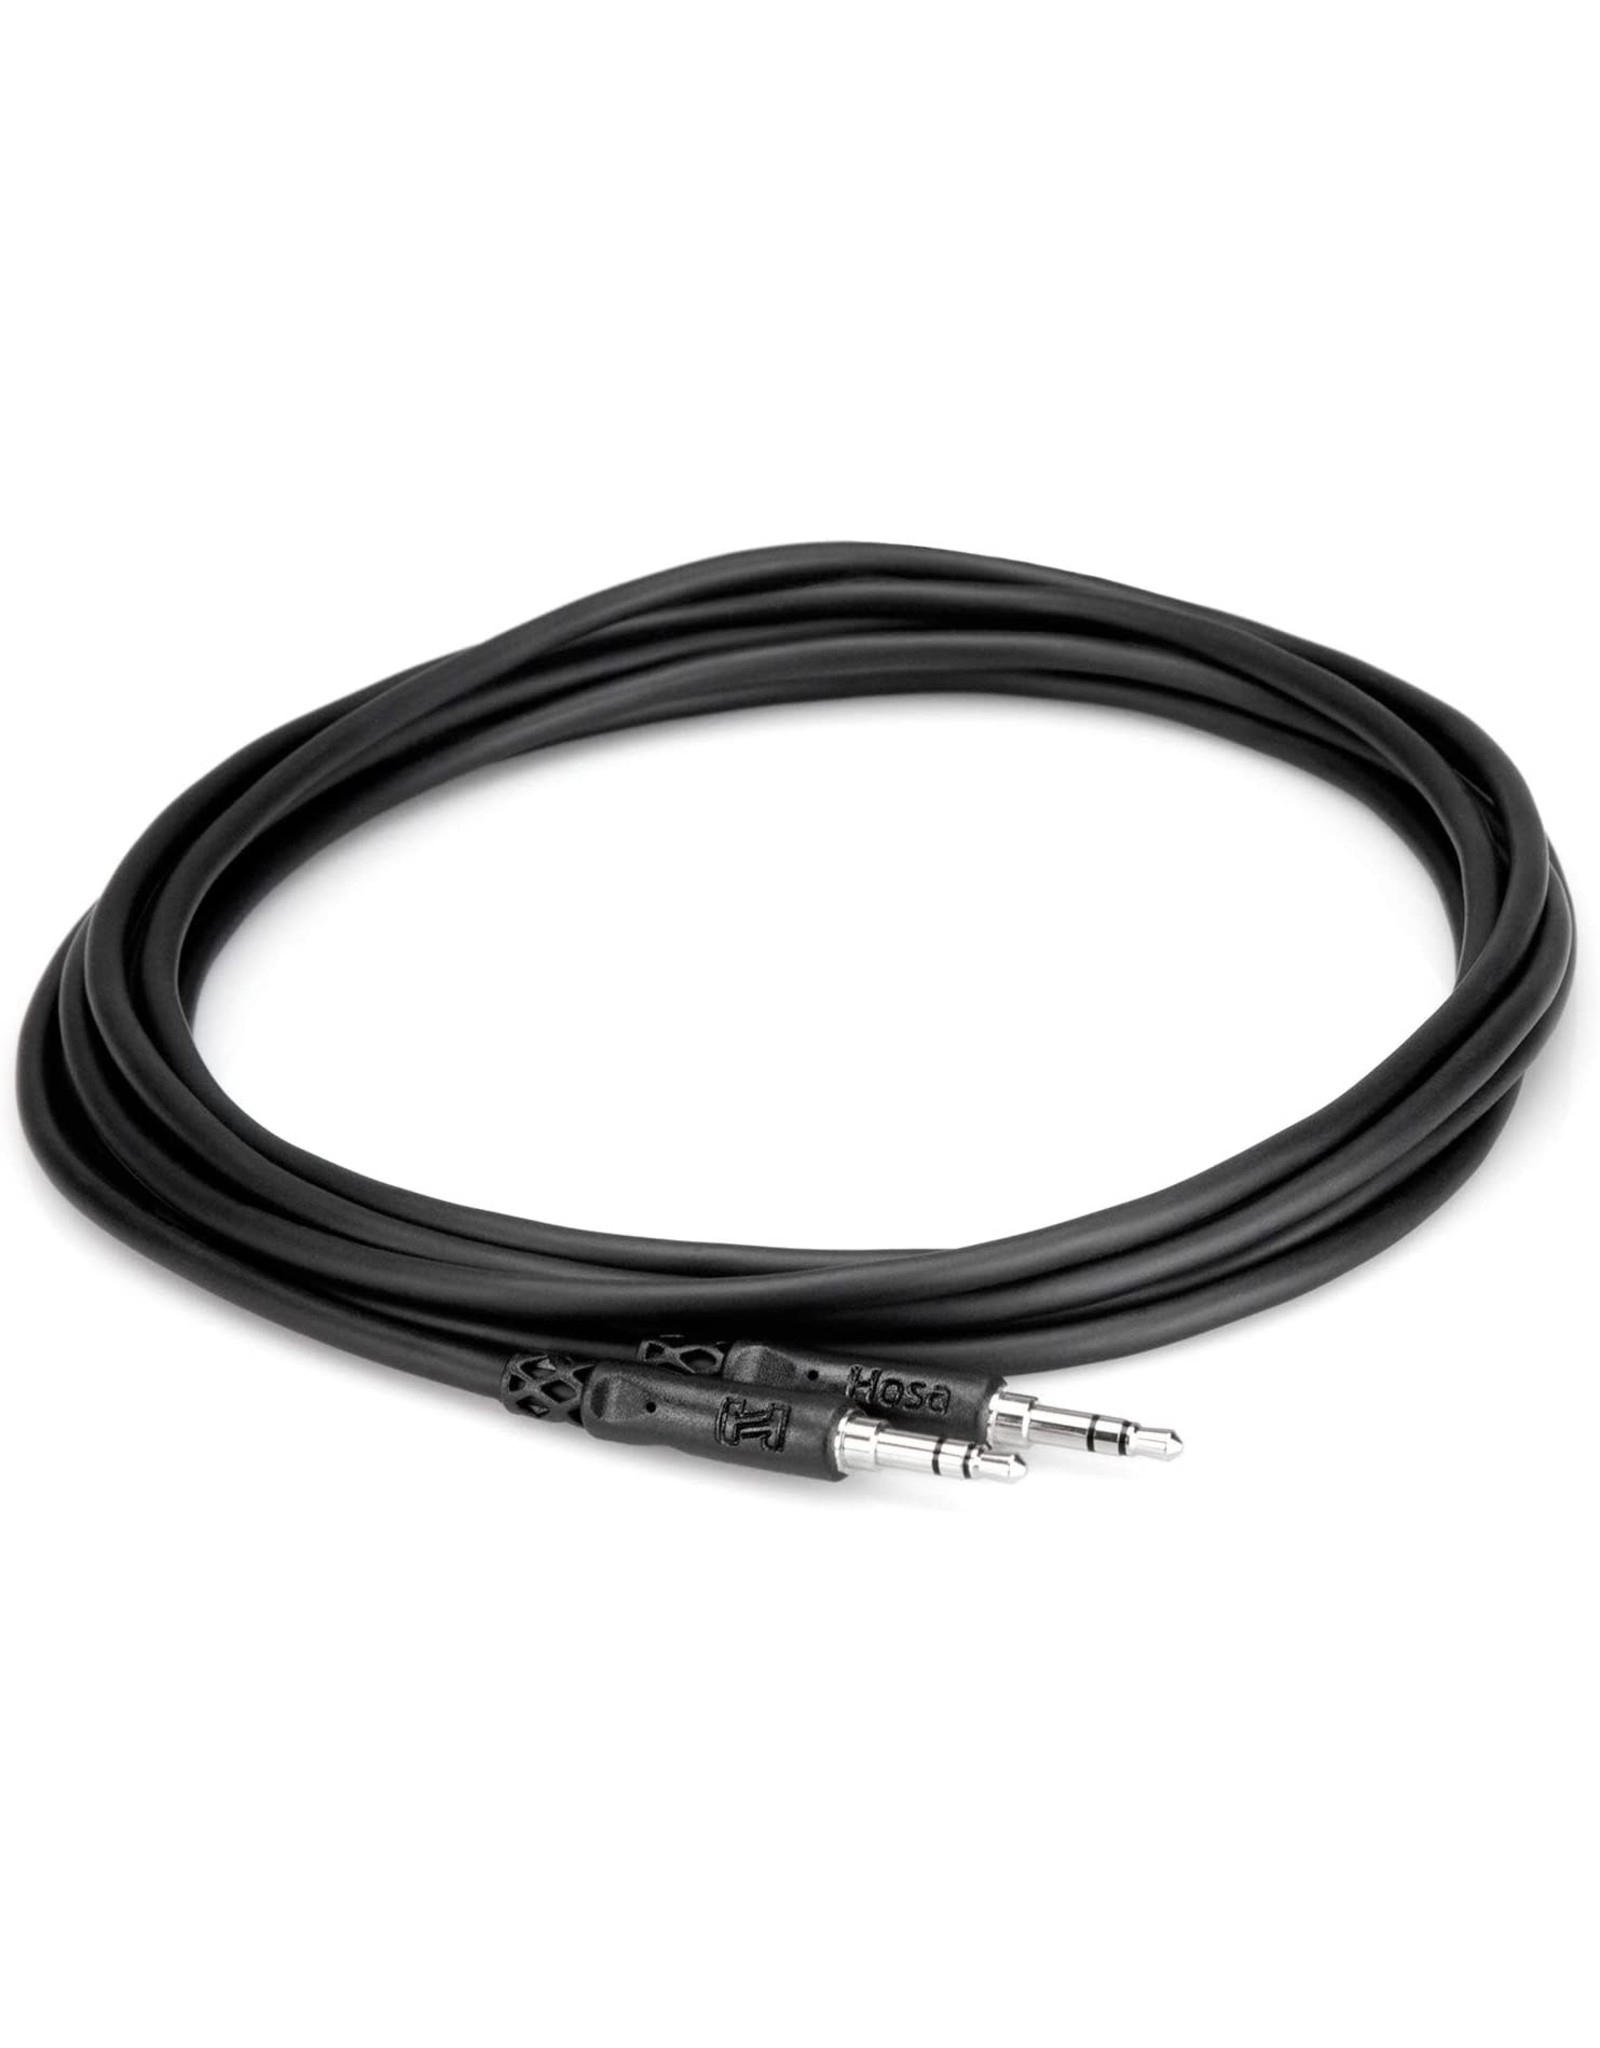 Hosa Hosa CMM-110 3.5 mm TRS to 3.5 mm TRS Stereo Interconnect Cable, 10 Feet